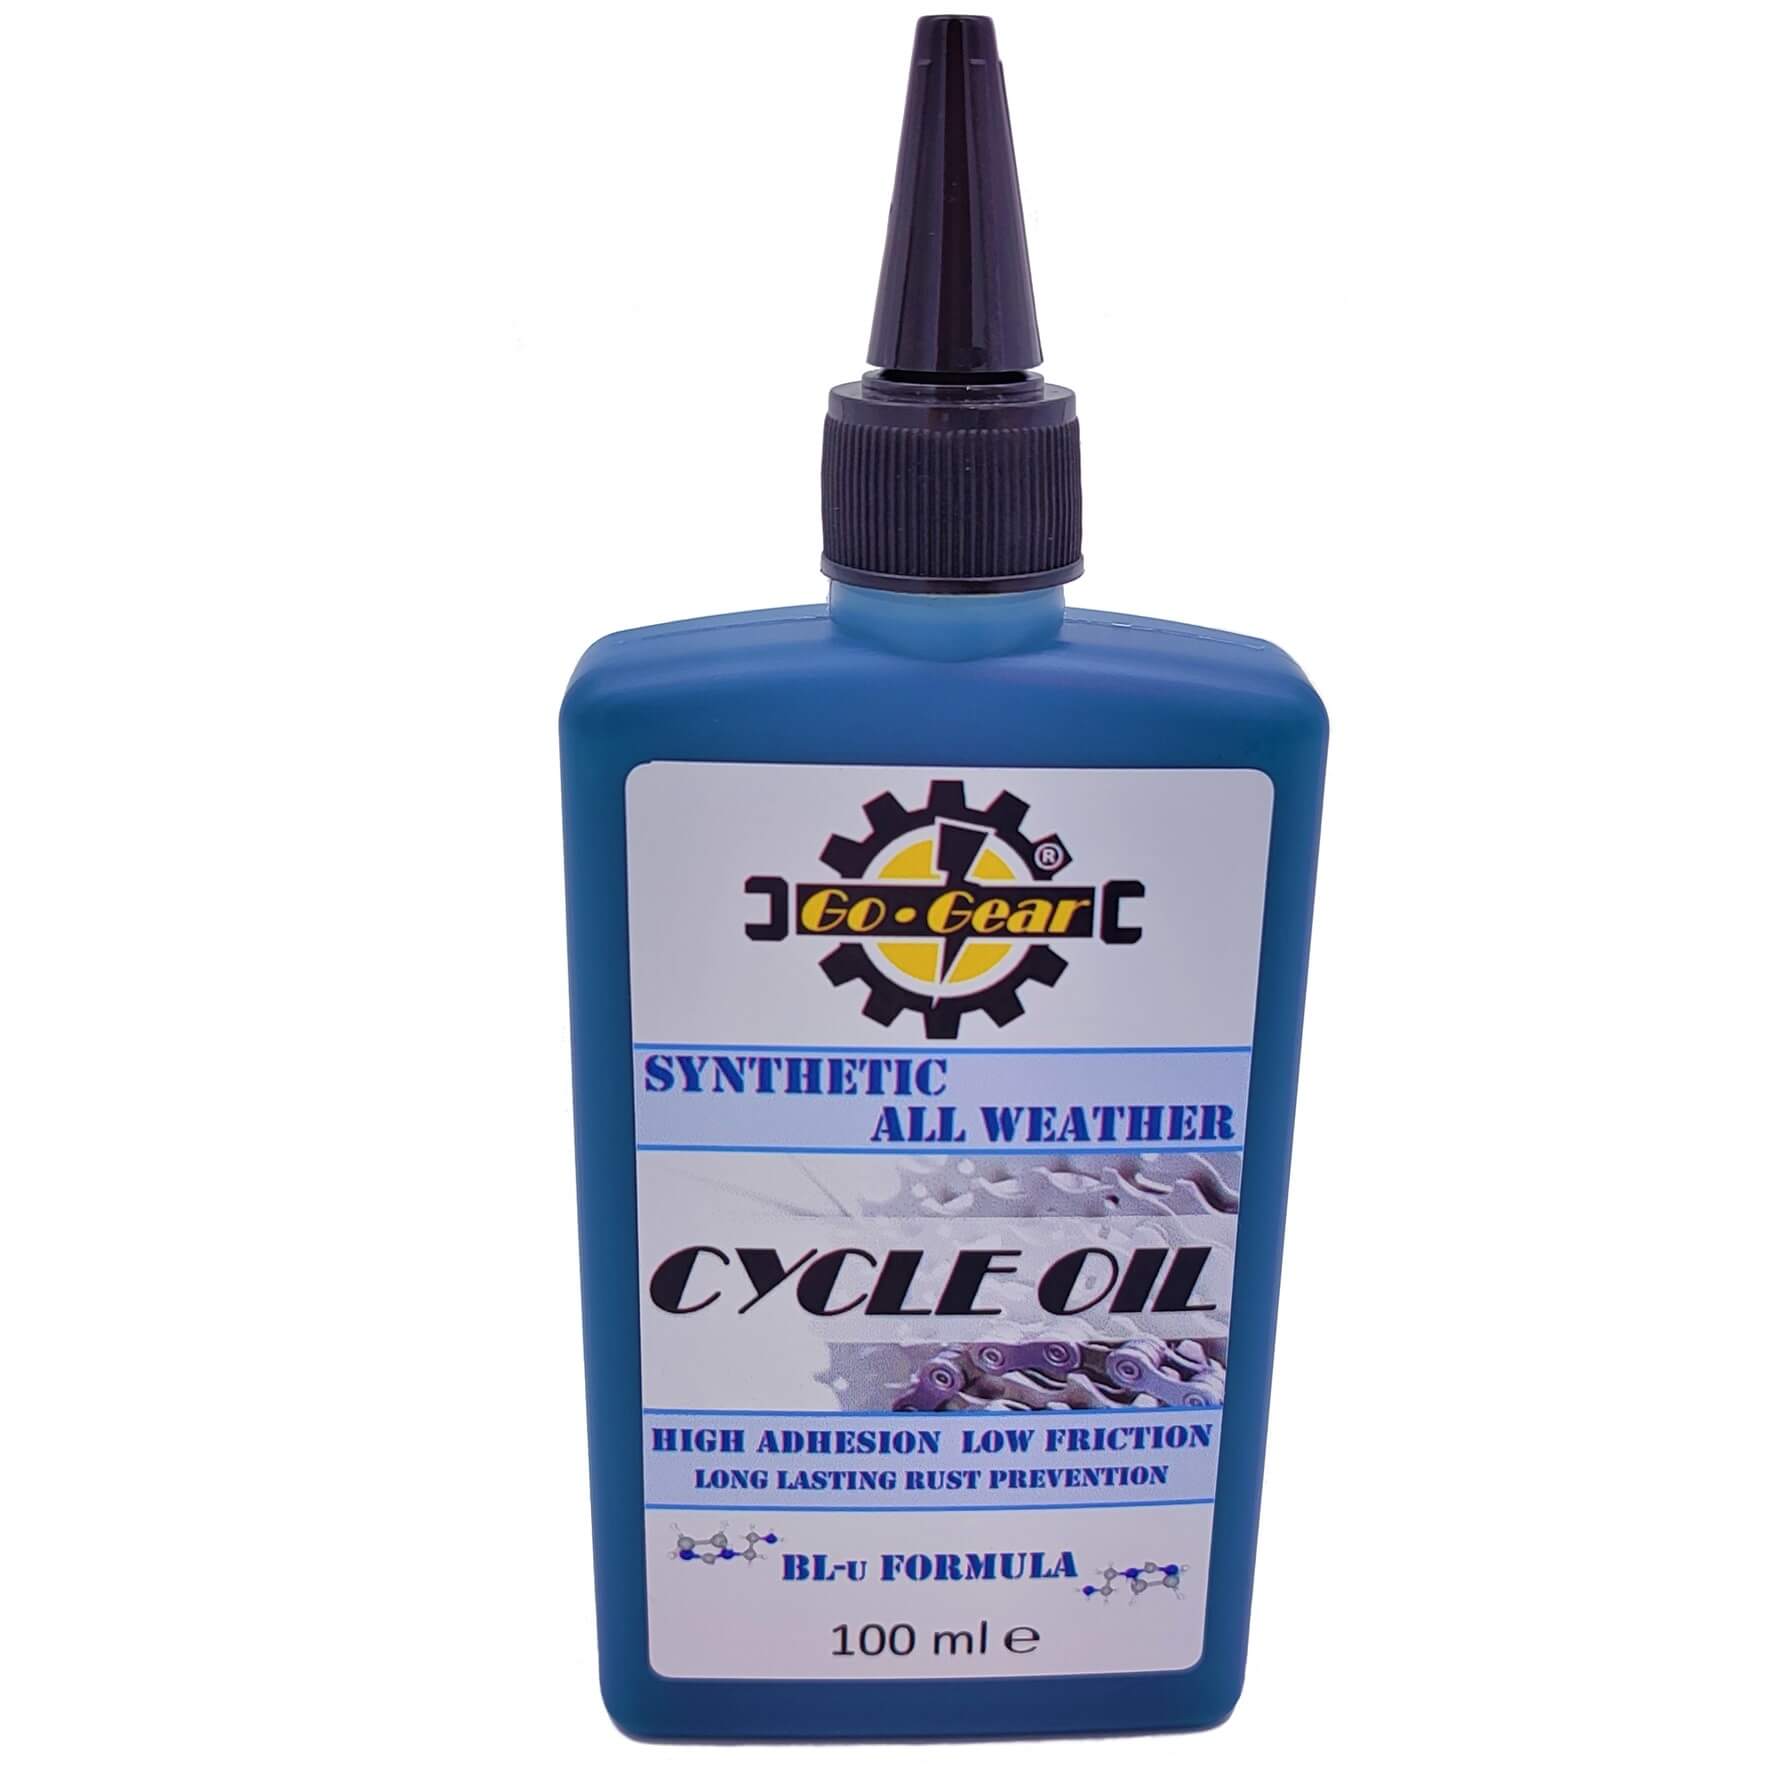 Cycle & Chain Oil For Bikes - Synthetic All Weather Version (100ml)